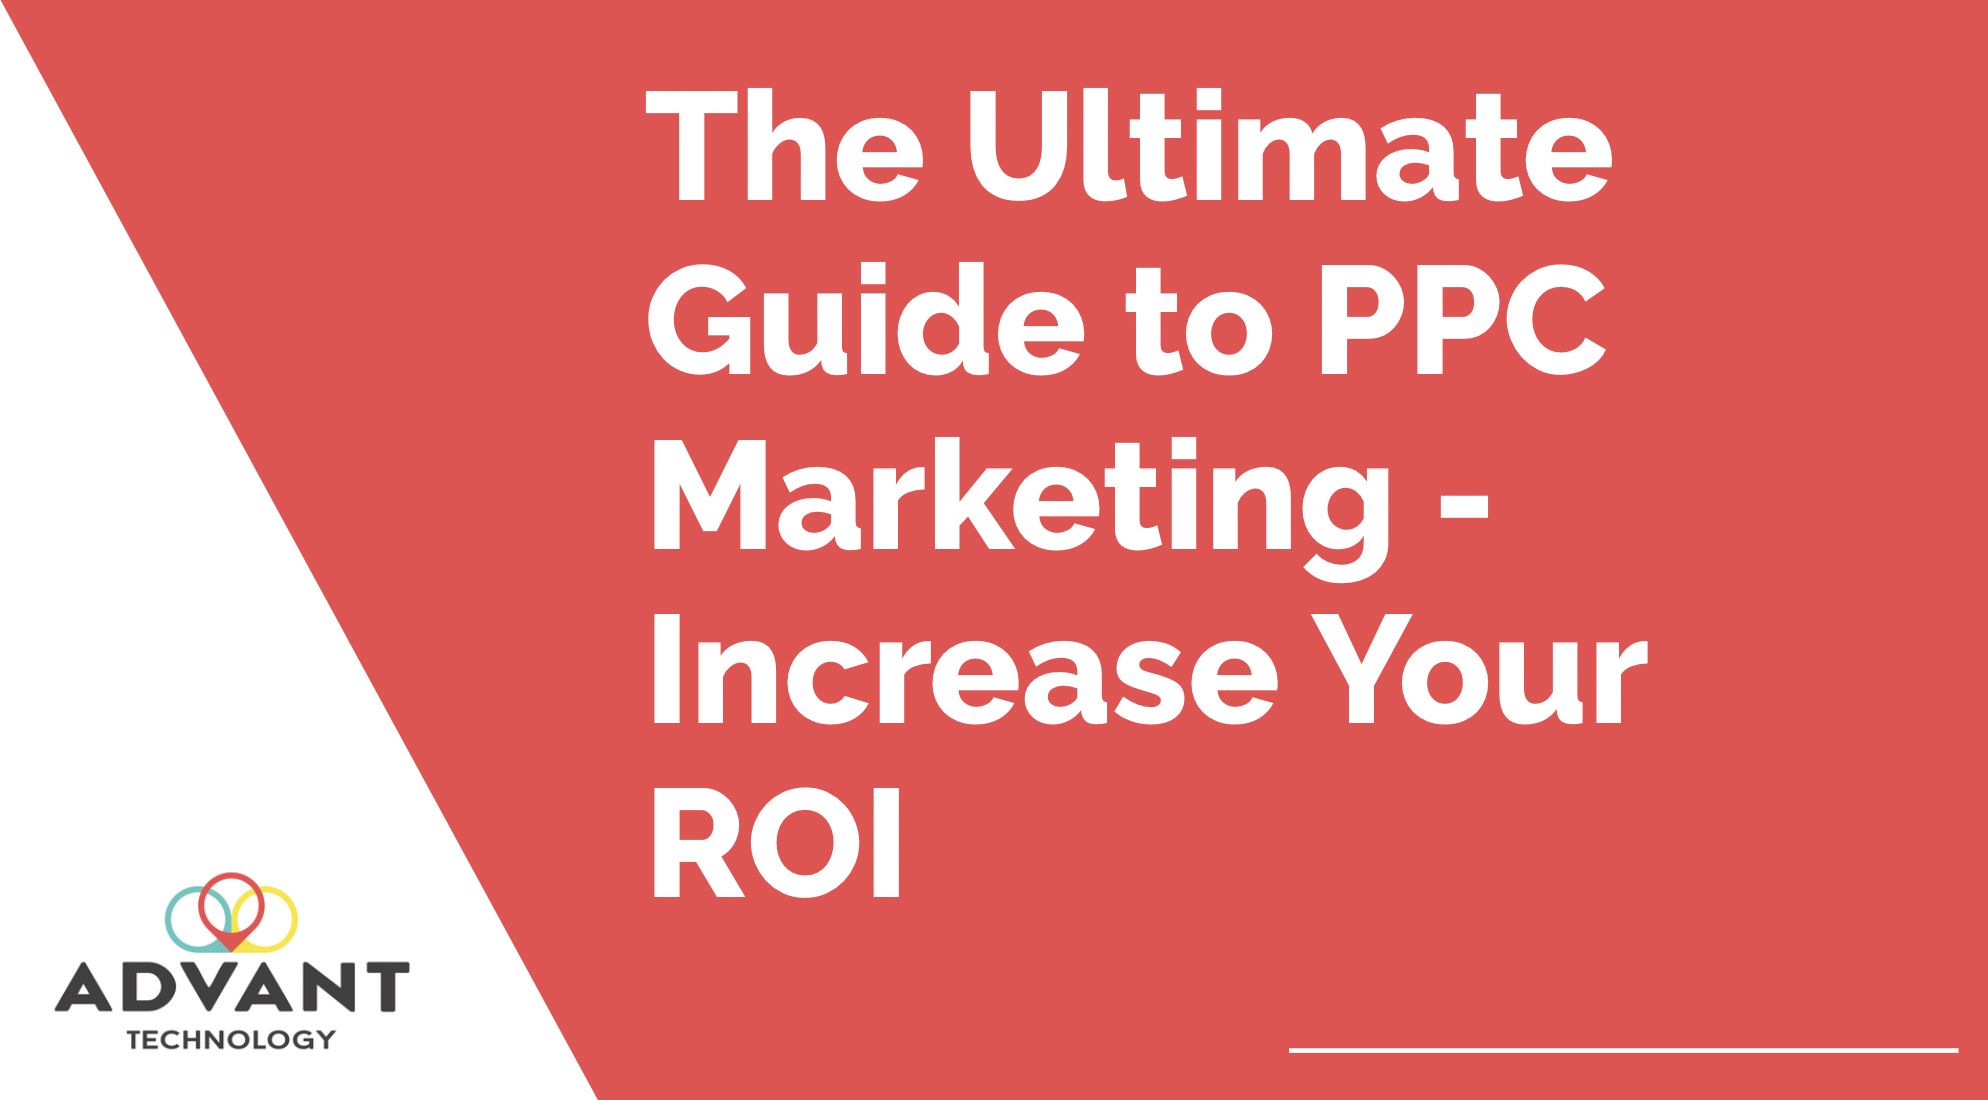 The Ultimate Guide to PPC Marketing - Increase Your ROI